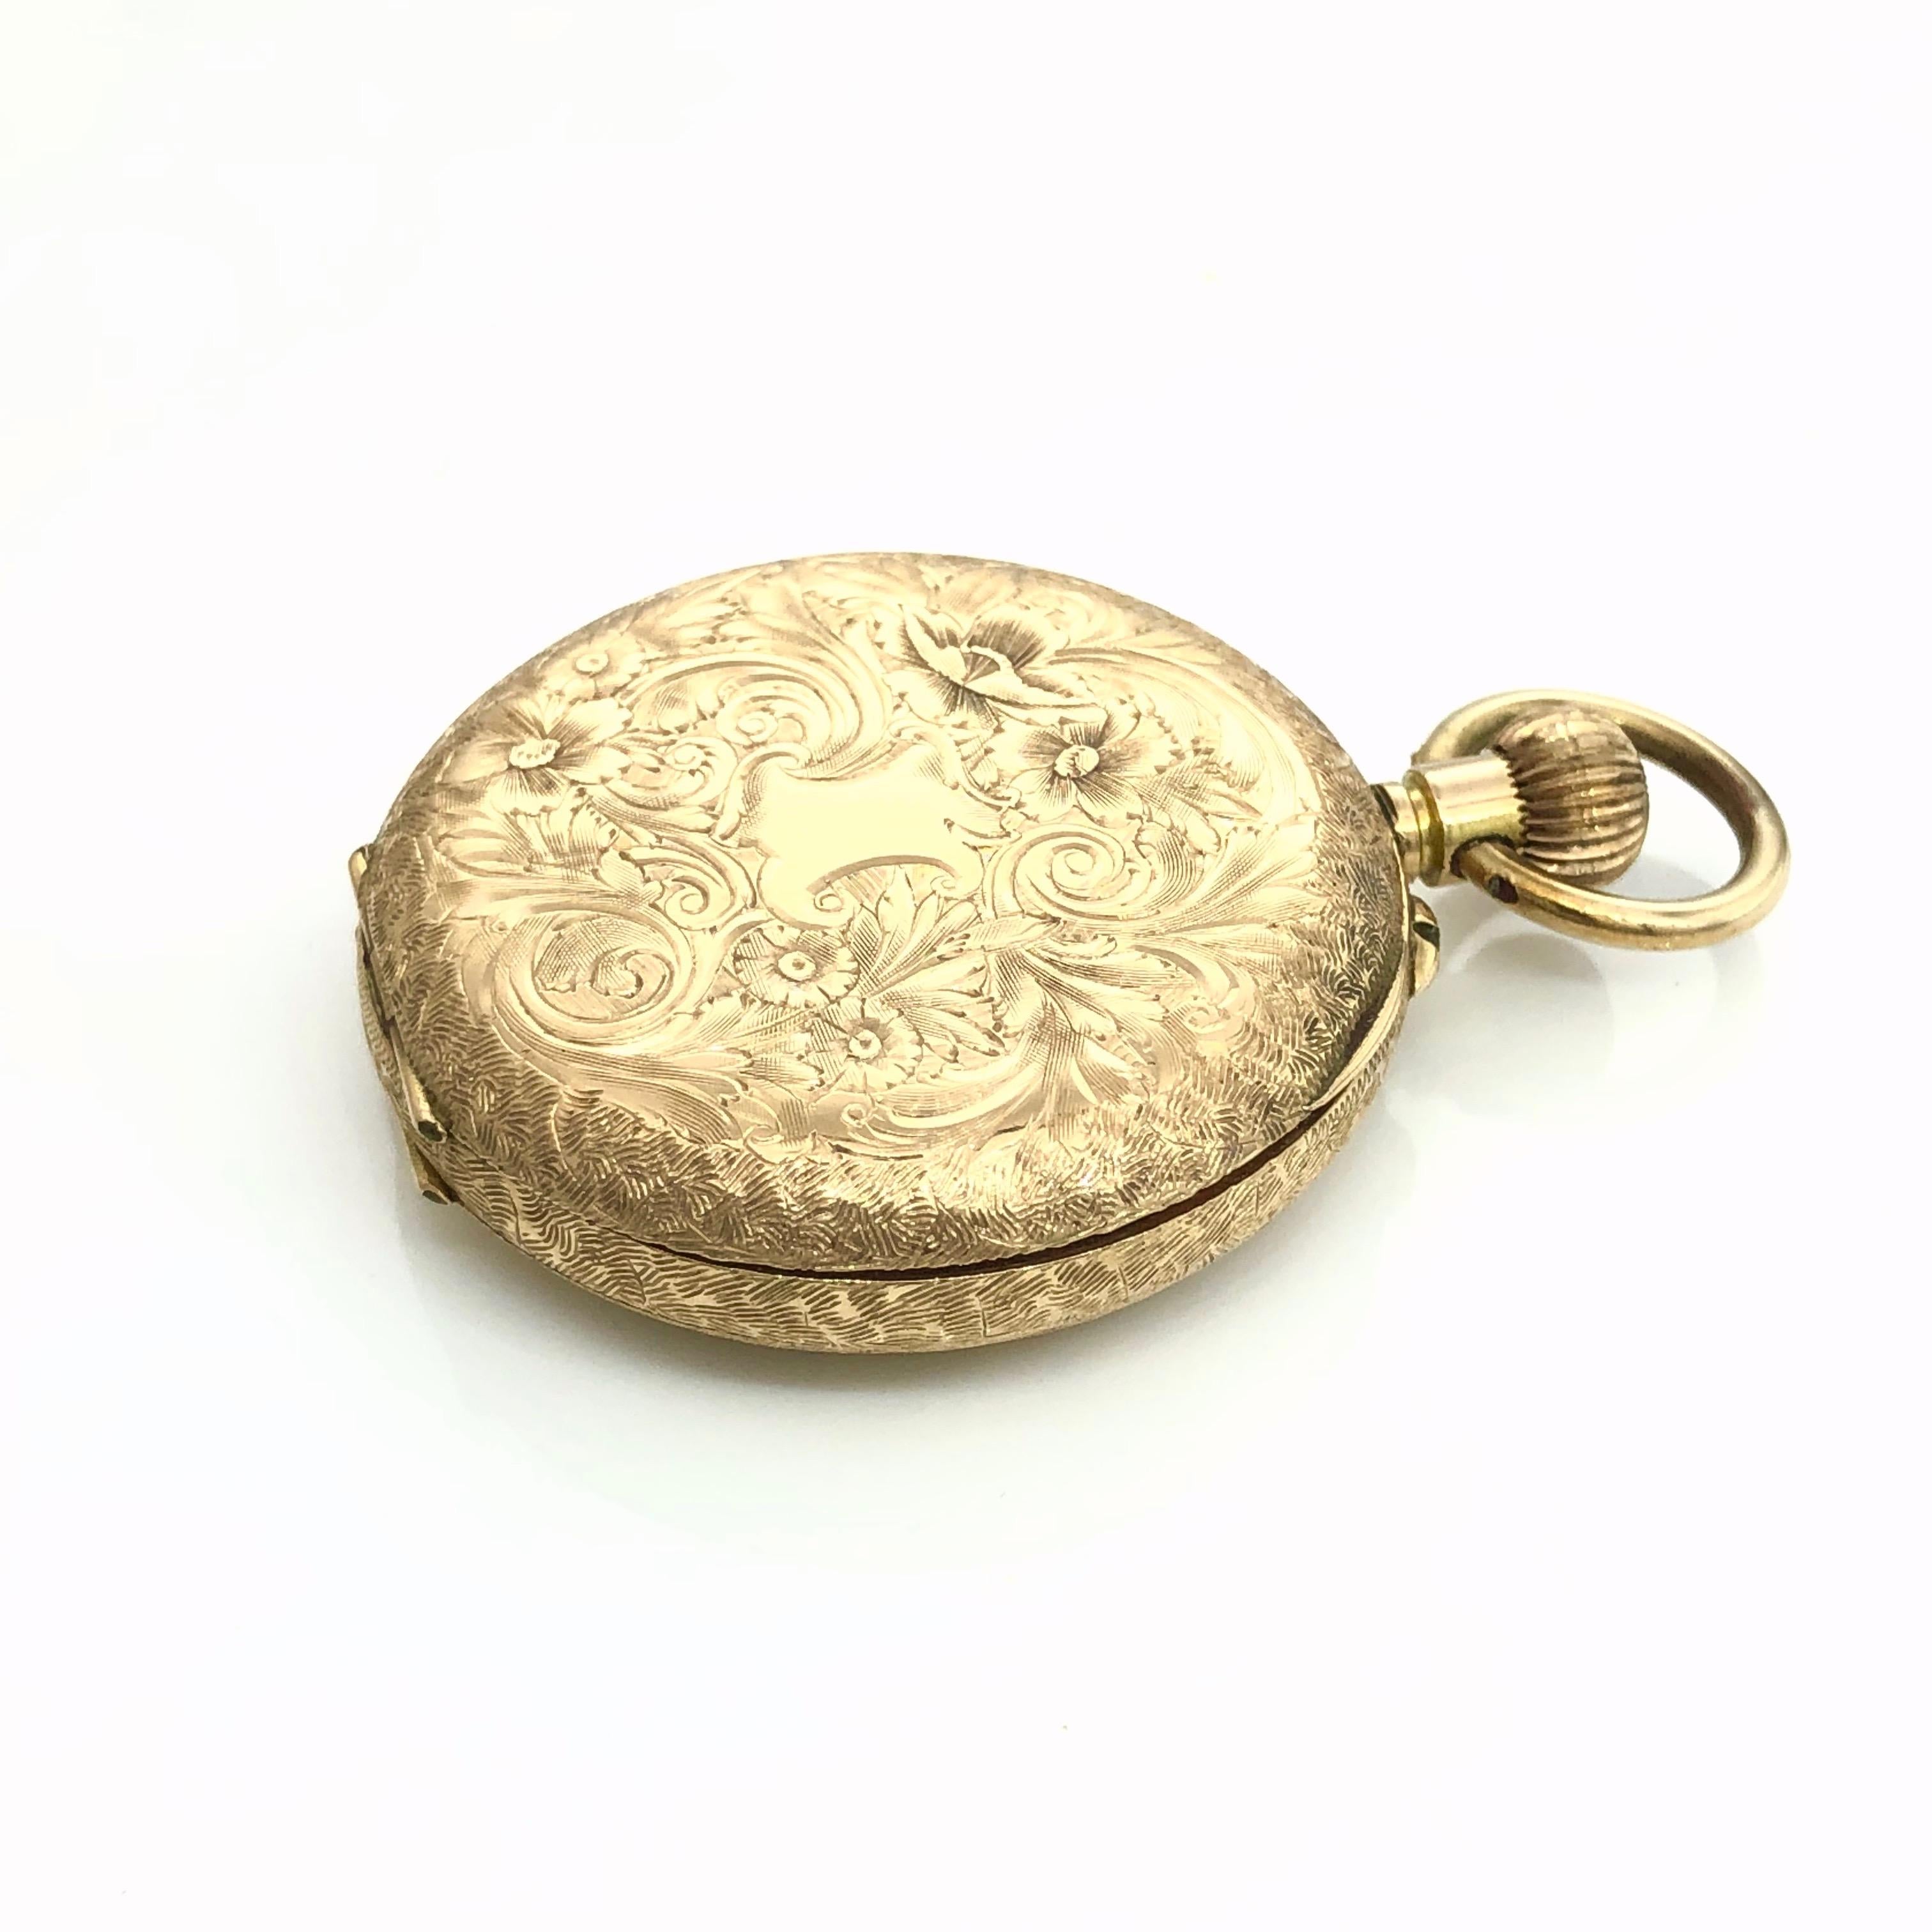 Elegant Stewart Dawson & Co 14 carat Solid Gold Open Face Ladies Pocket Watch .
Late 19th - early 20th century, marked 14C to inner back cover and serial number #75128.
Featuring a gilt floral incised golden dial with Roman numerals,
engraved wide